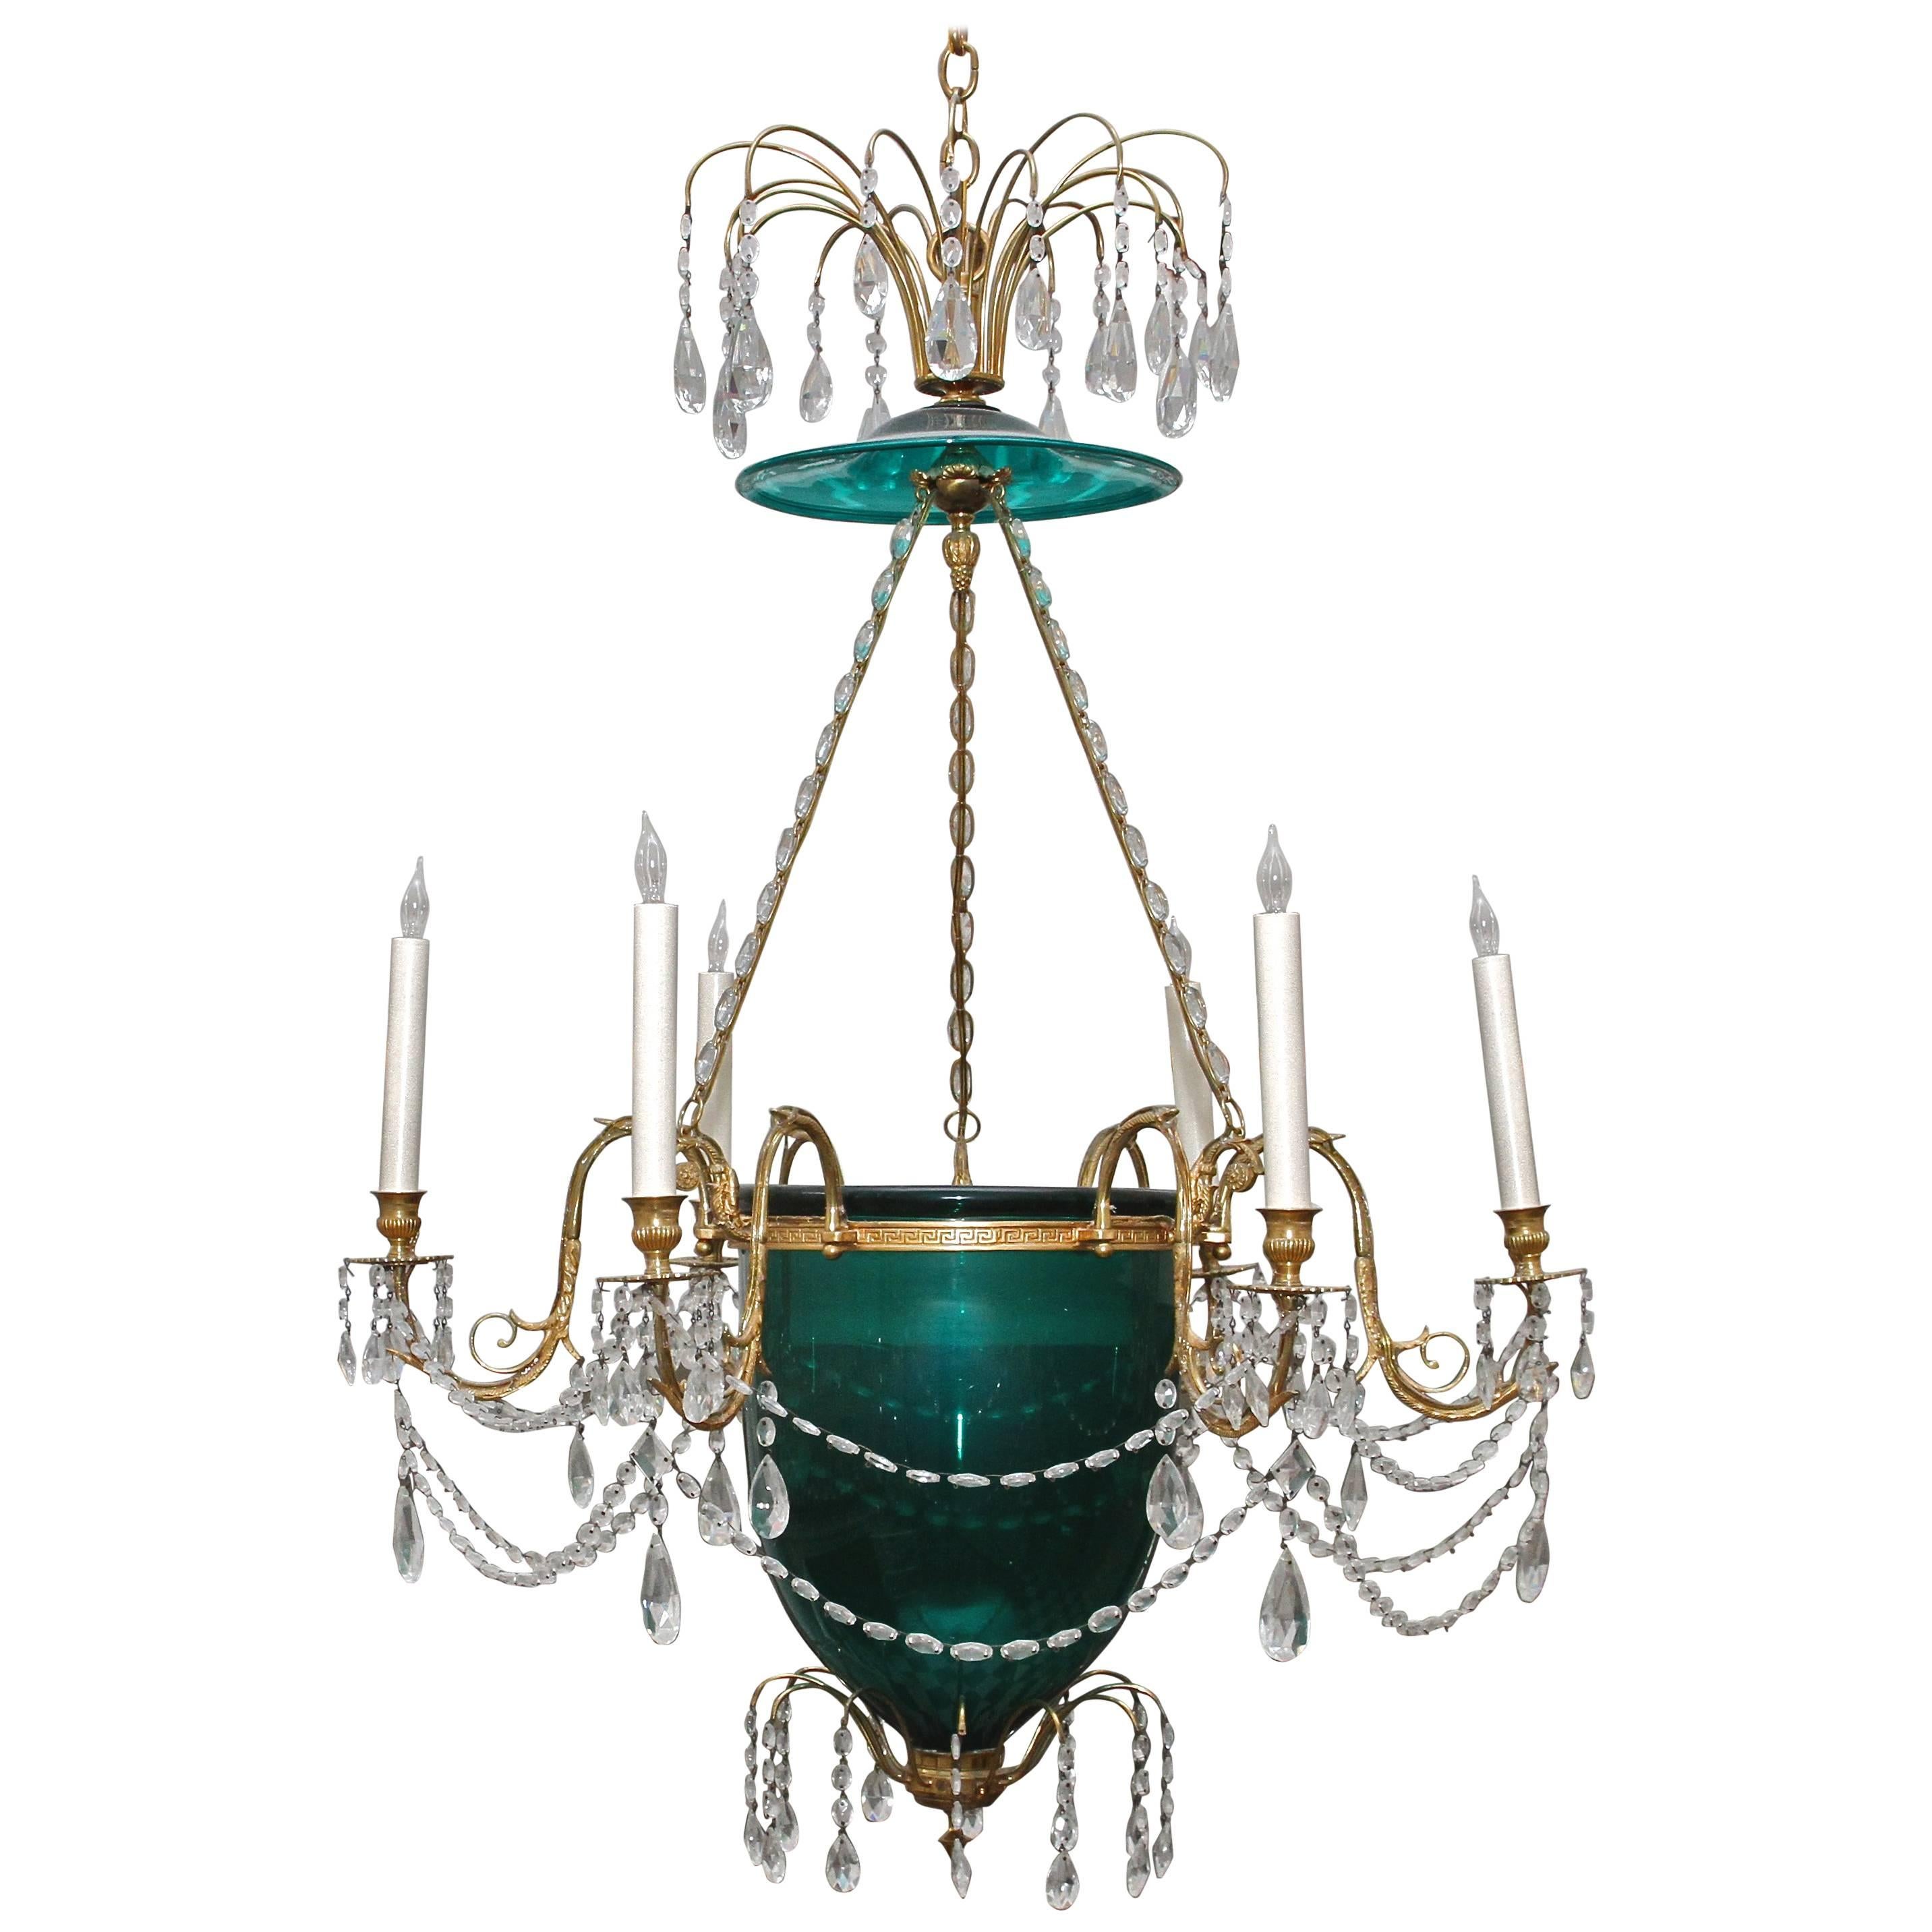 Russian or Baltic Neoclassical Style Emerald Green Six-Light Bell Chandelier